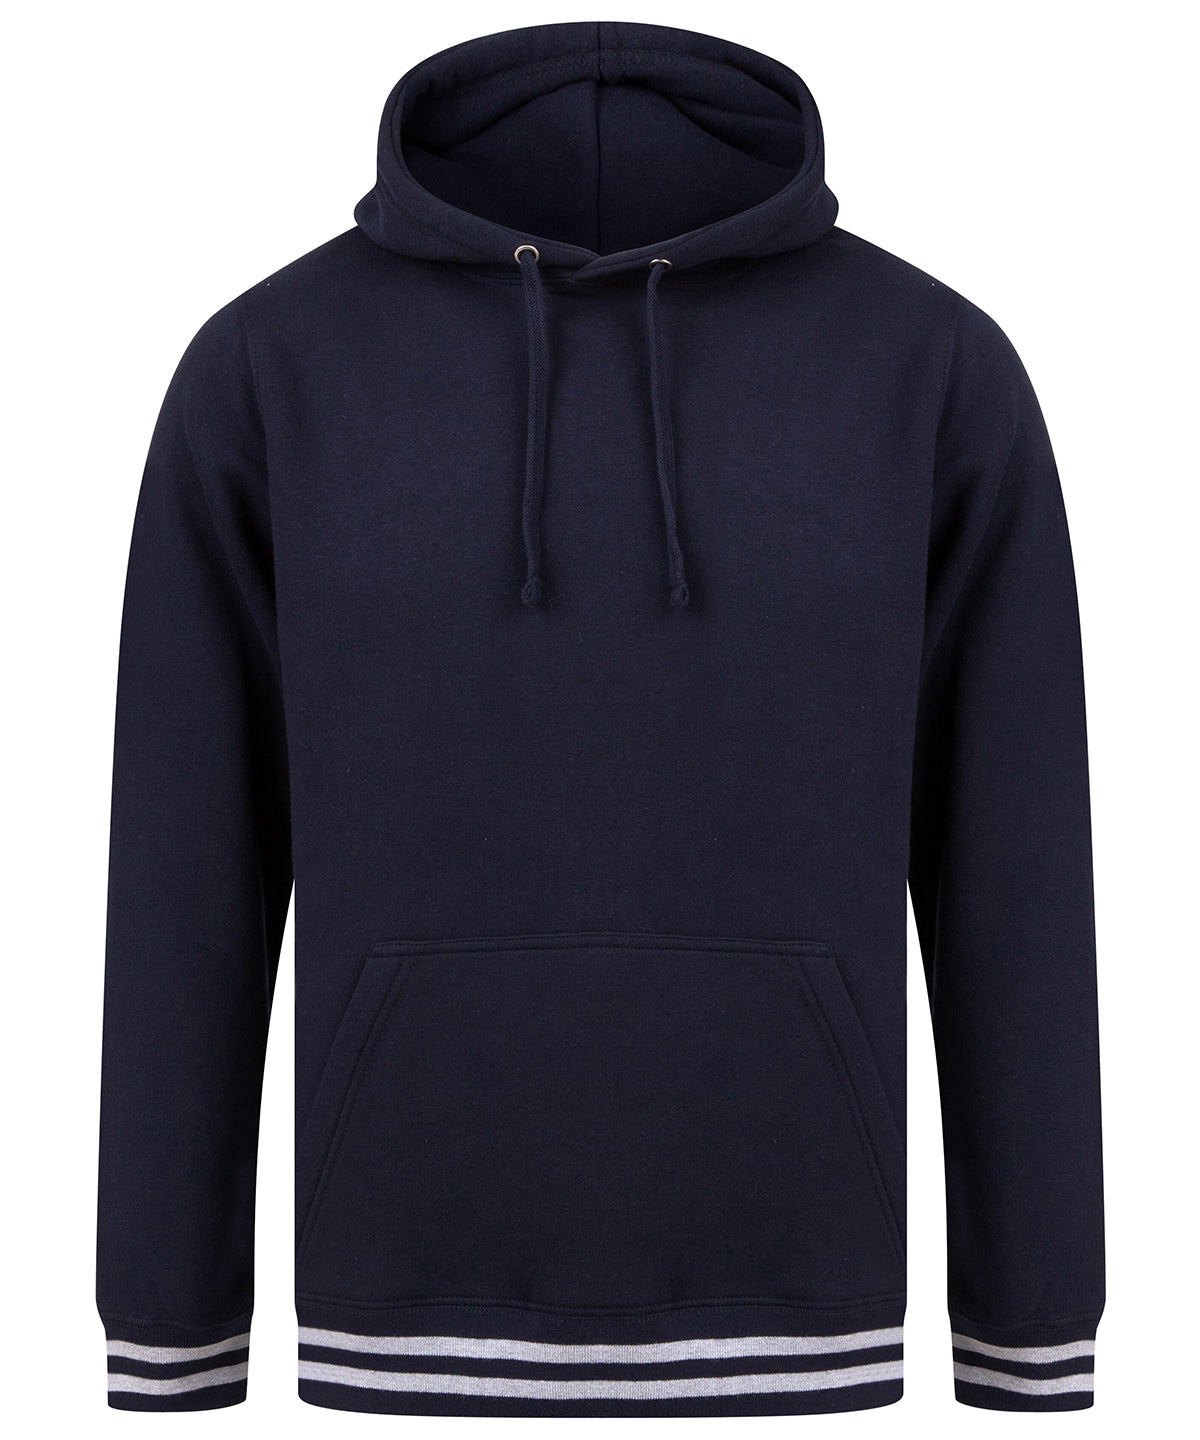 Personalised Hoodies - Black Front Row Hoodie with striped cuffs